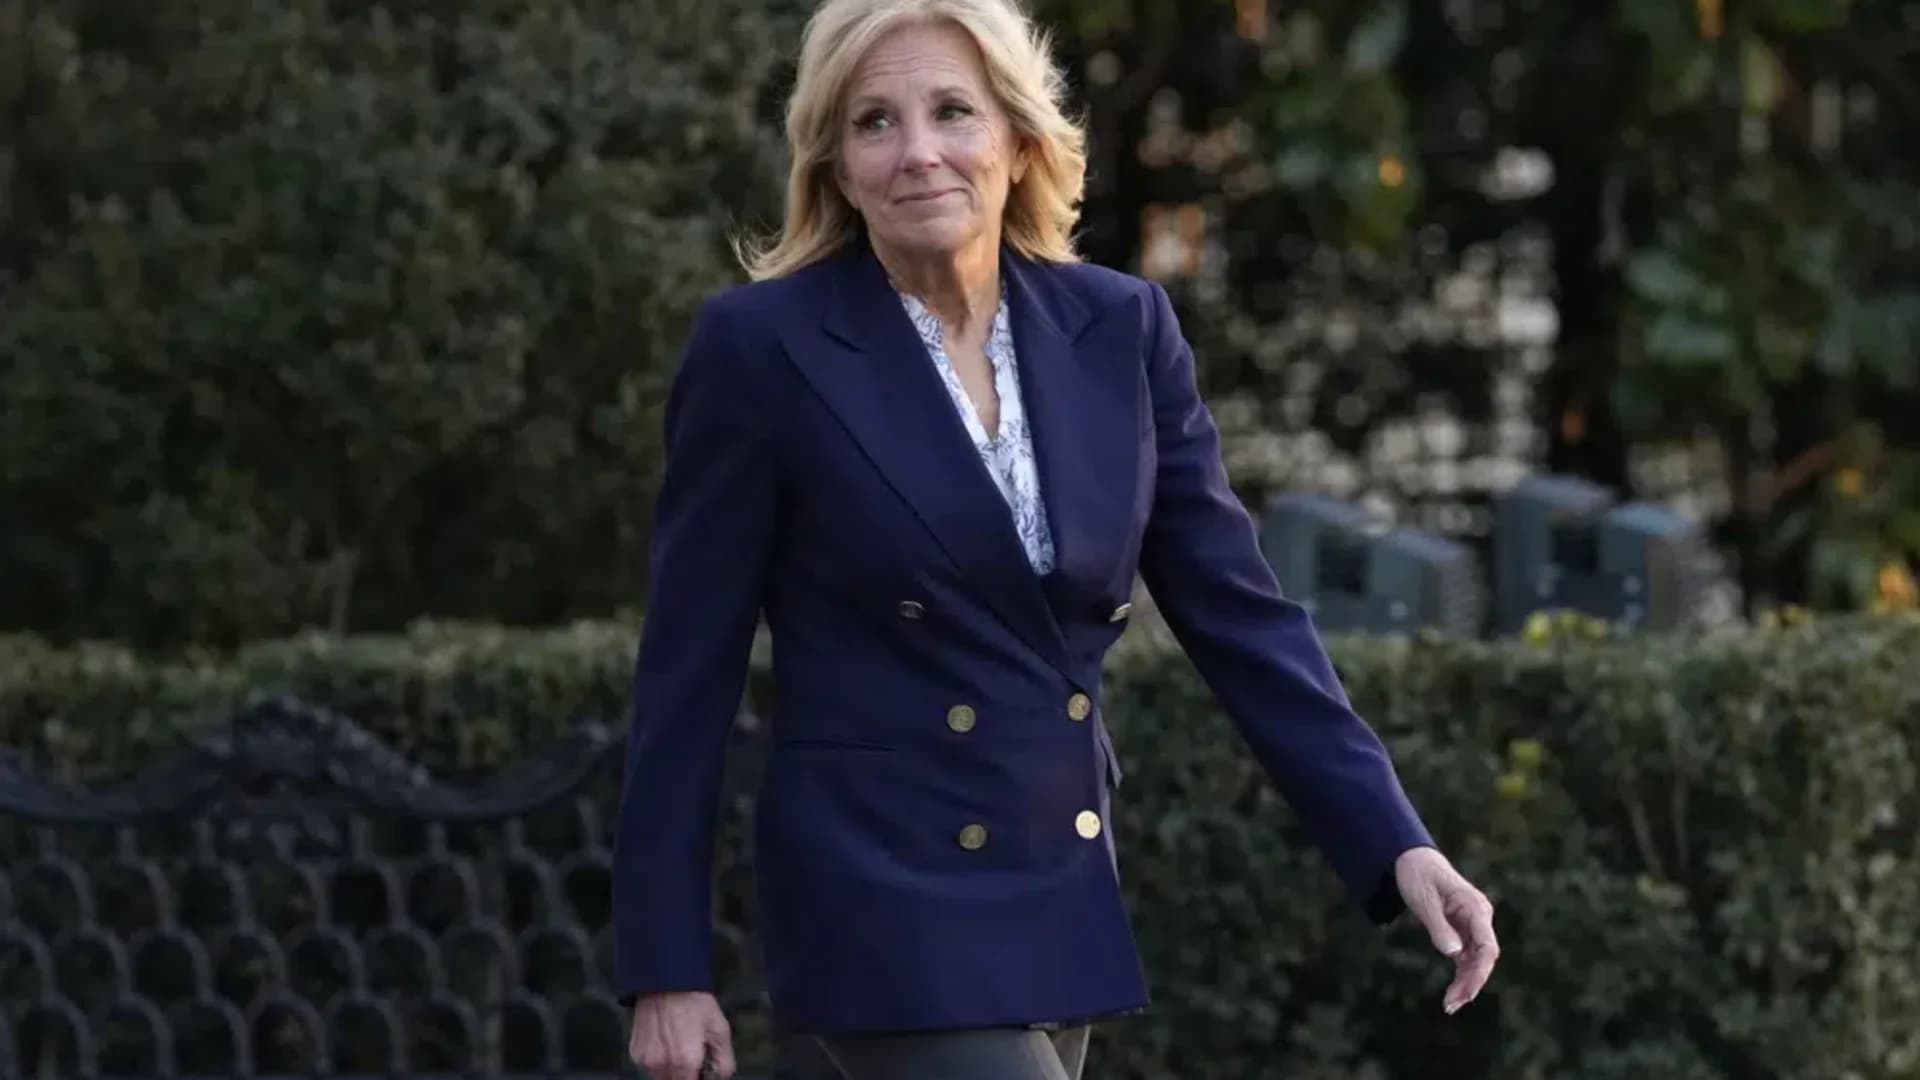 White House: Jill Biden has cancerous lesions removed